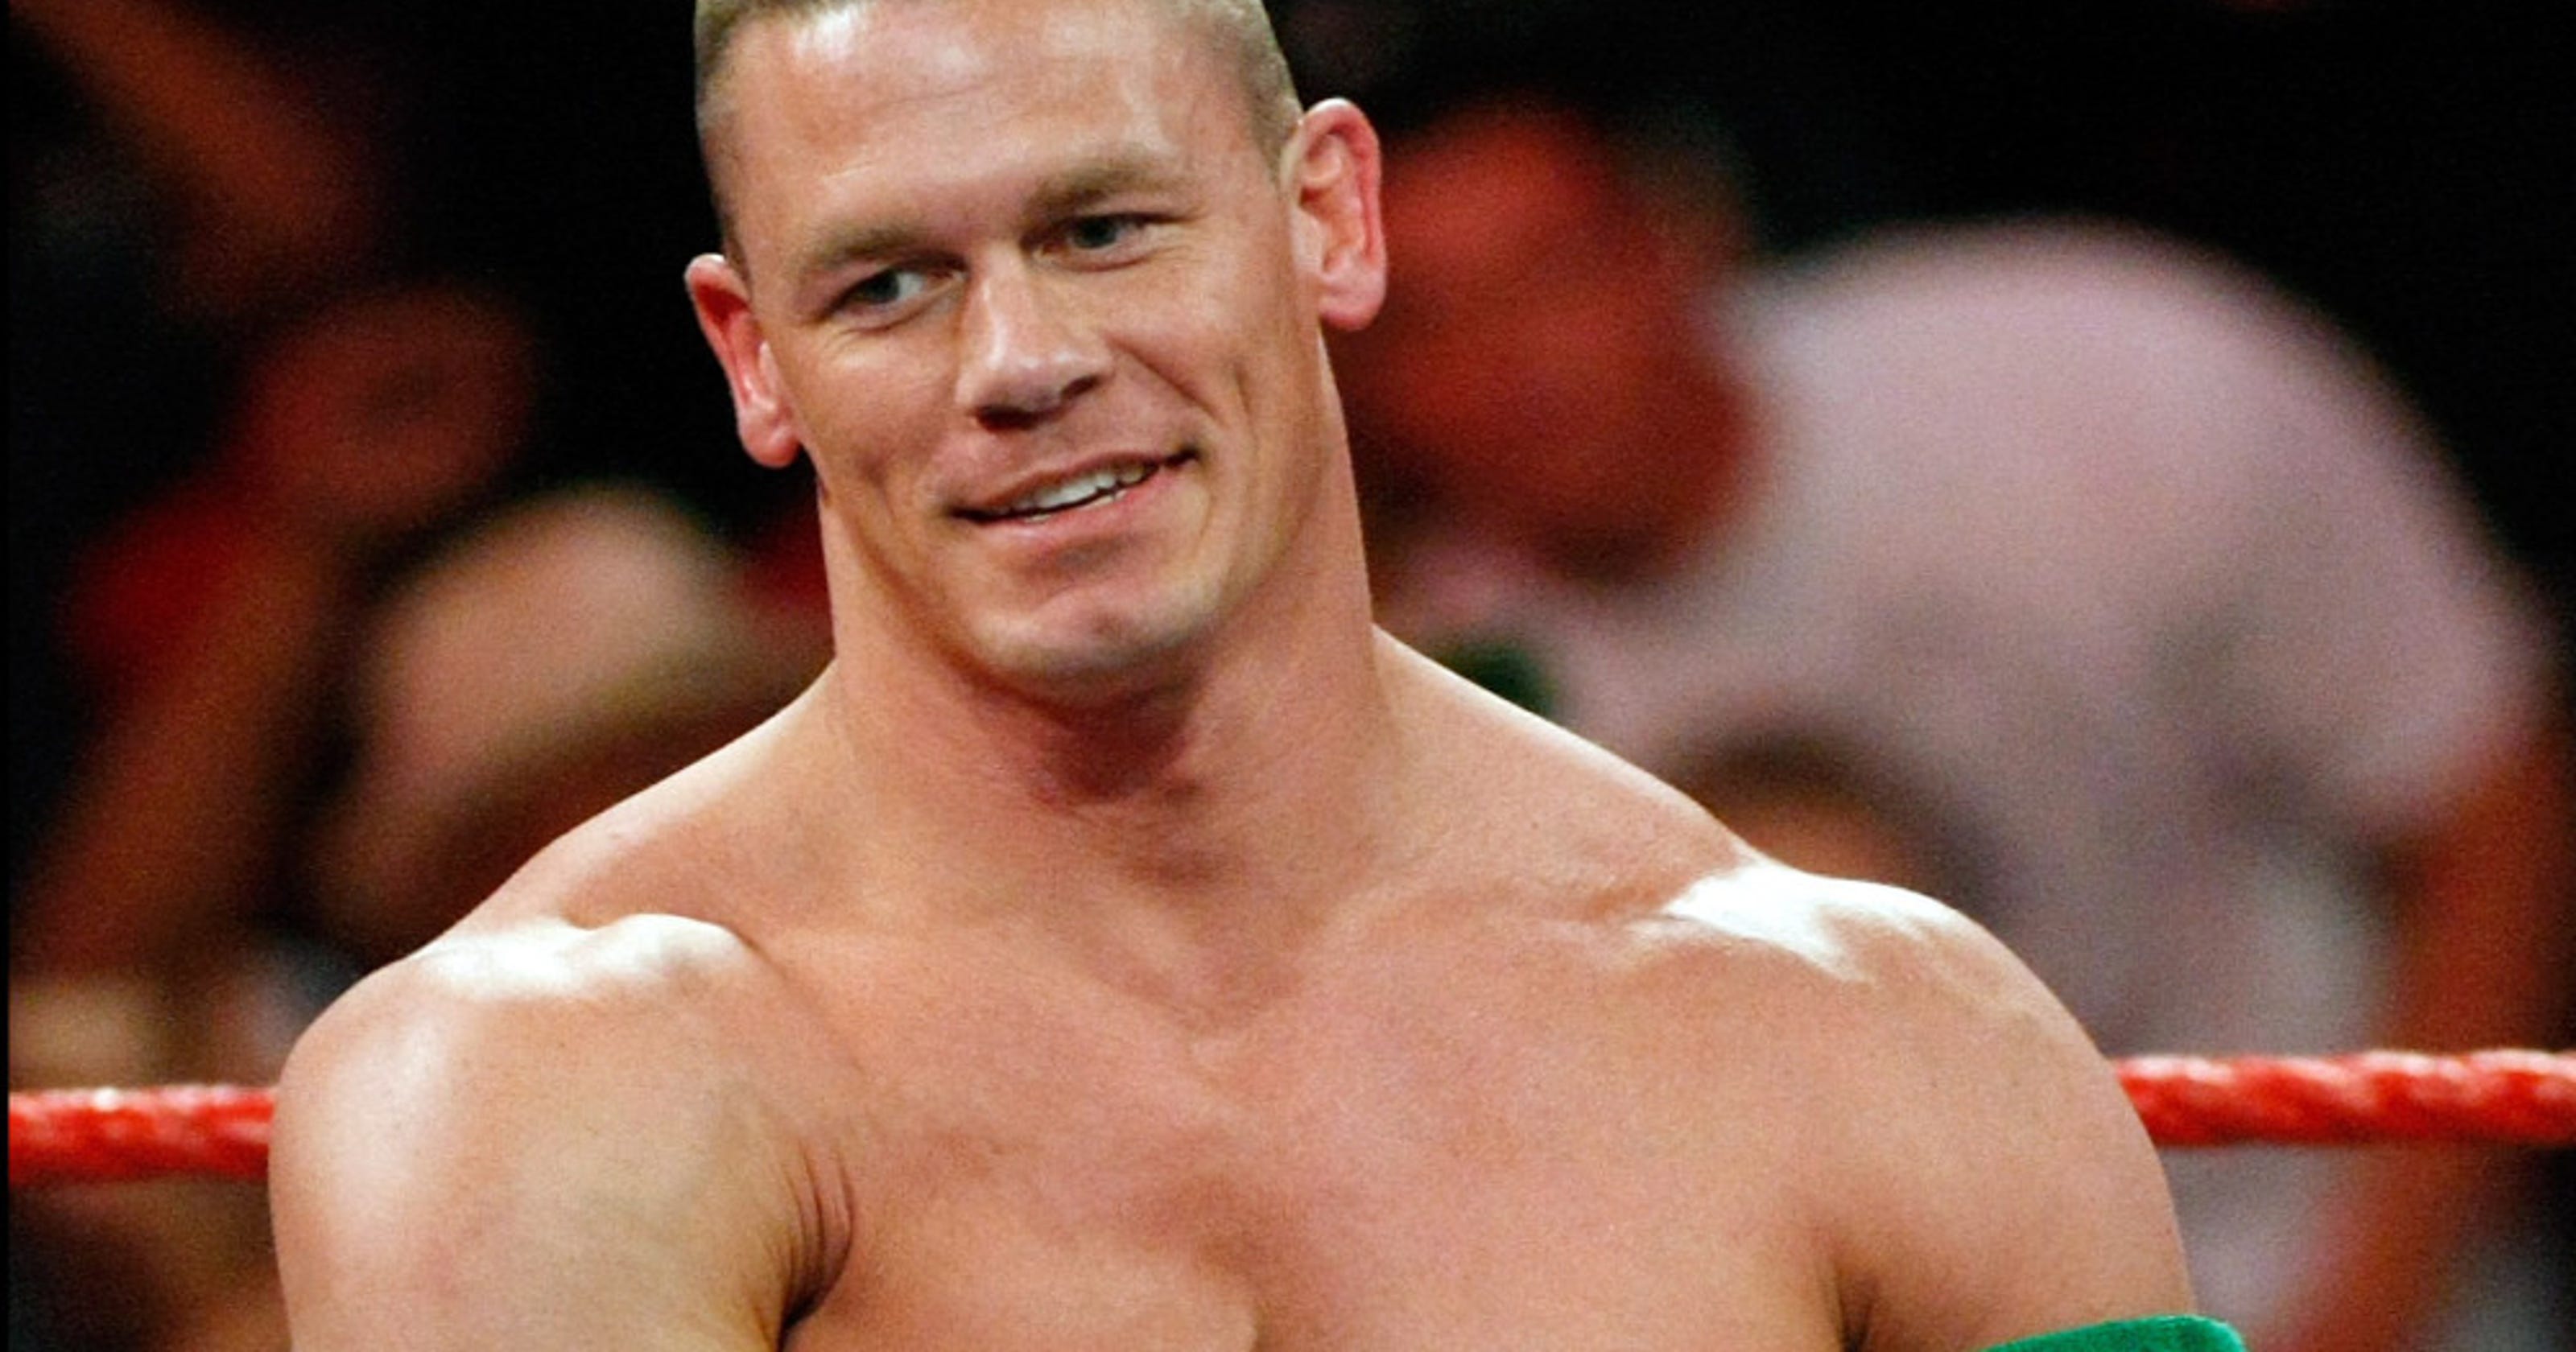 John Cena to return to WWE on New Year's Day, fans react